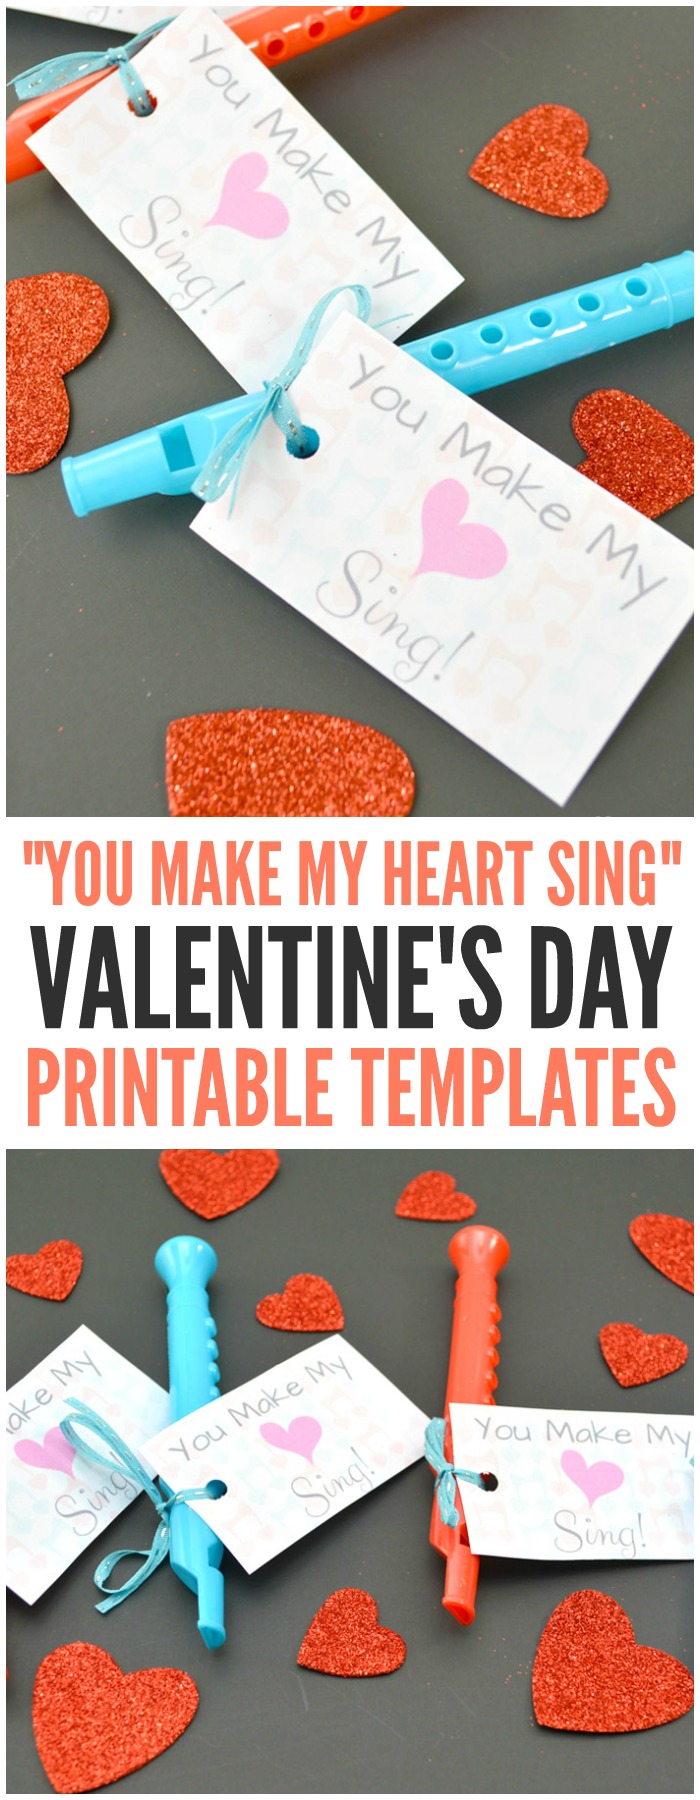 "You Make My Heart Sing" Valentine Day Printable Template for Kids #Valentinesdayprintabletemplate #printabletemplateforkids #papercraftsforkids